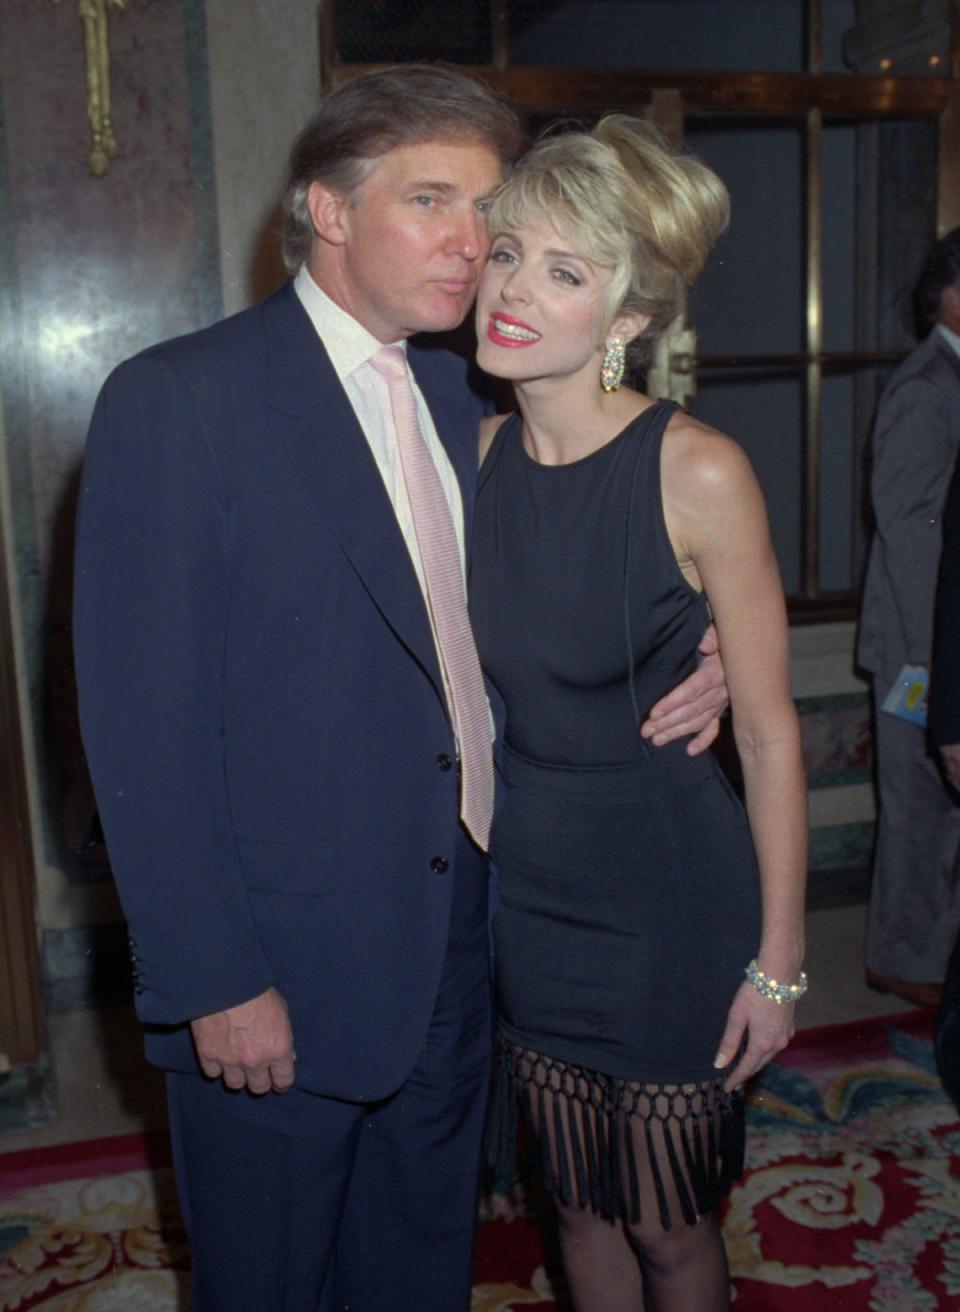 Marla Maples with Donald Trump in August 1992 (Associated Press)